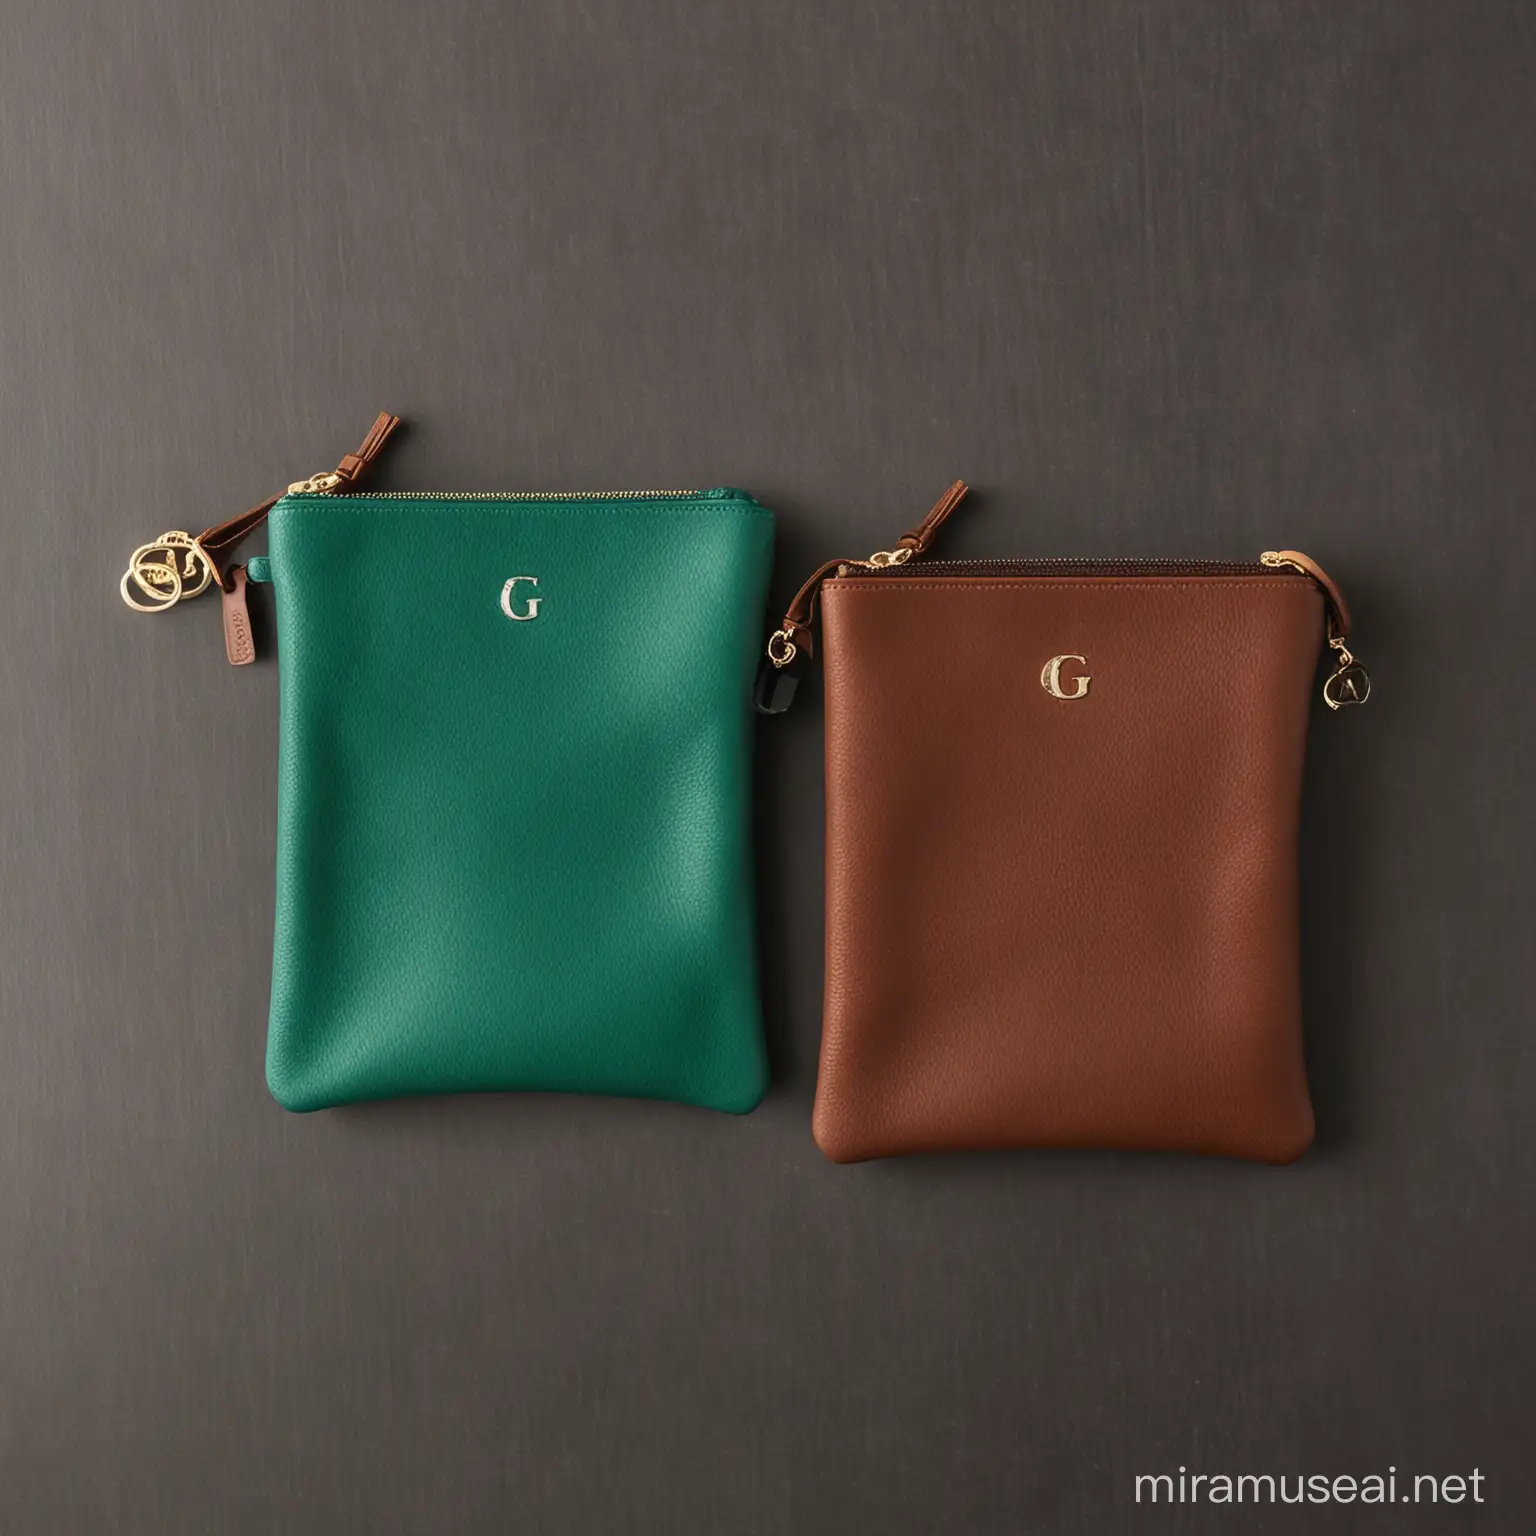 2 luxury travel pouches with a G charm on the zipper in a green emerald color and a brown espresso color